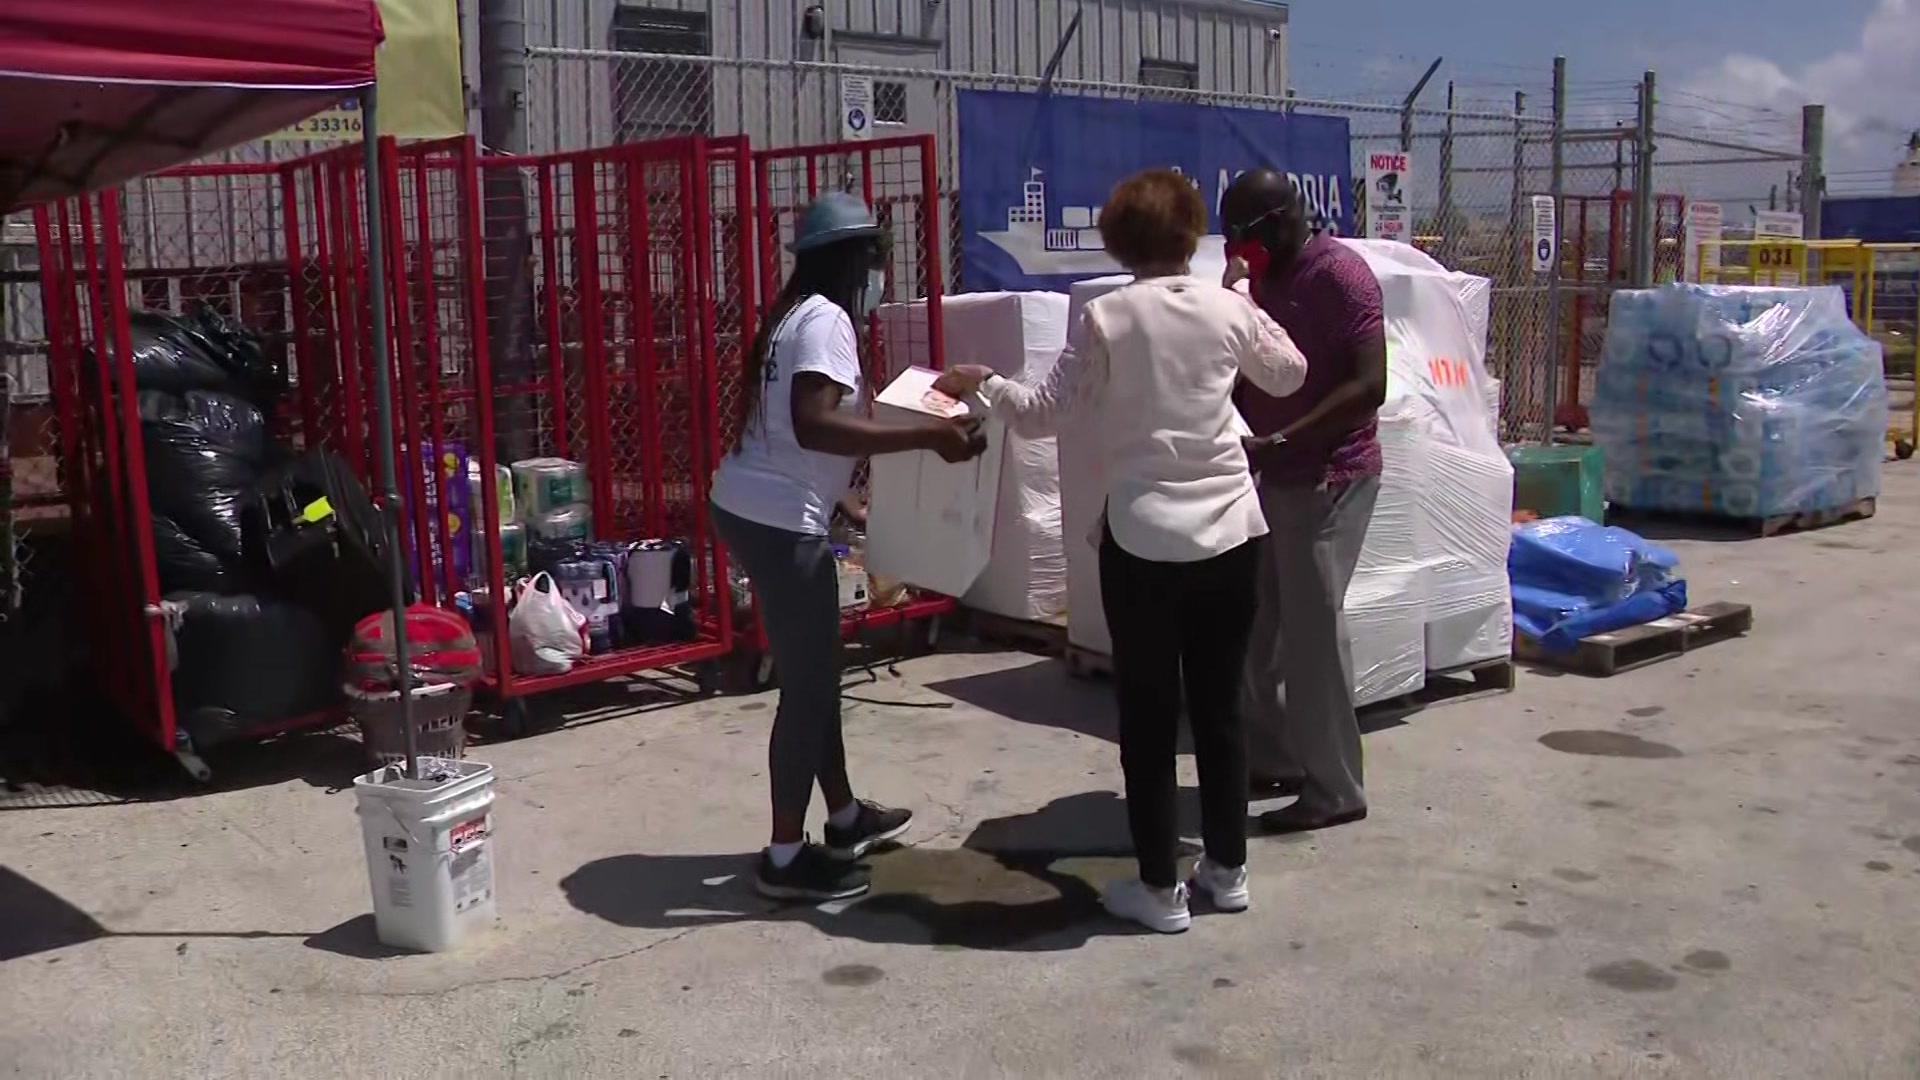 Local Efforts Underway To Rush Much-Needed Medical Supplies To Haiti In Wake Of Devastating Earthquake